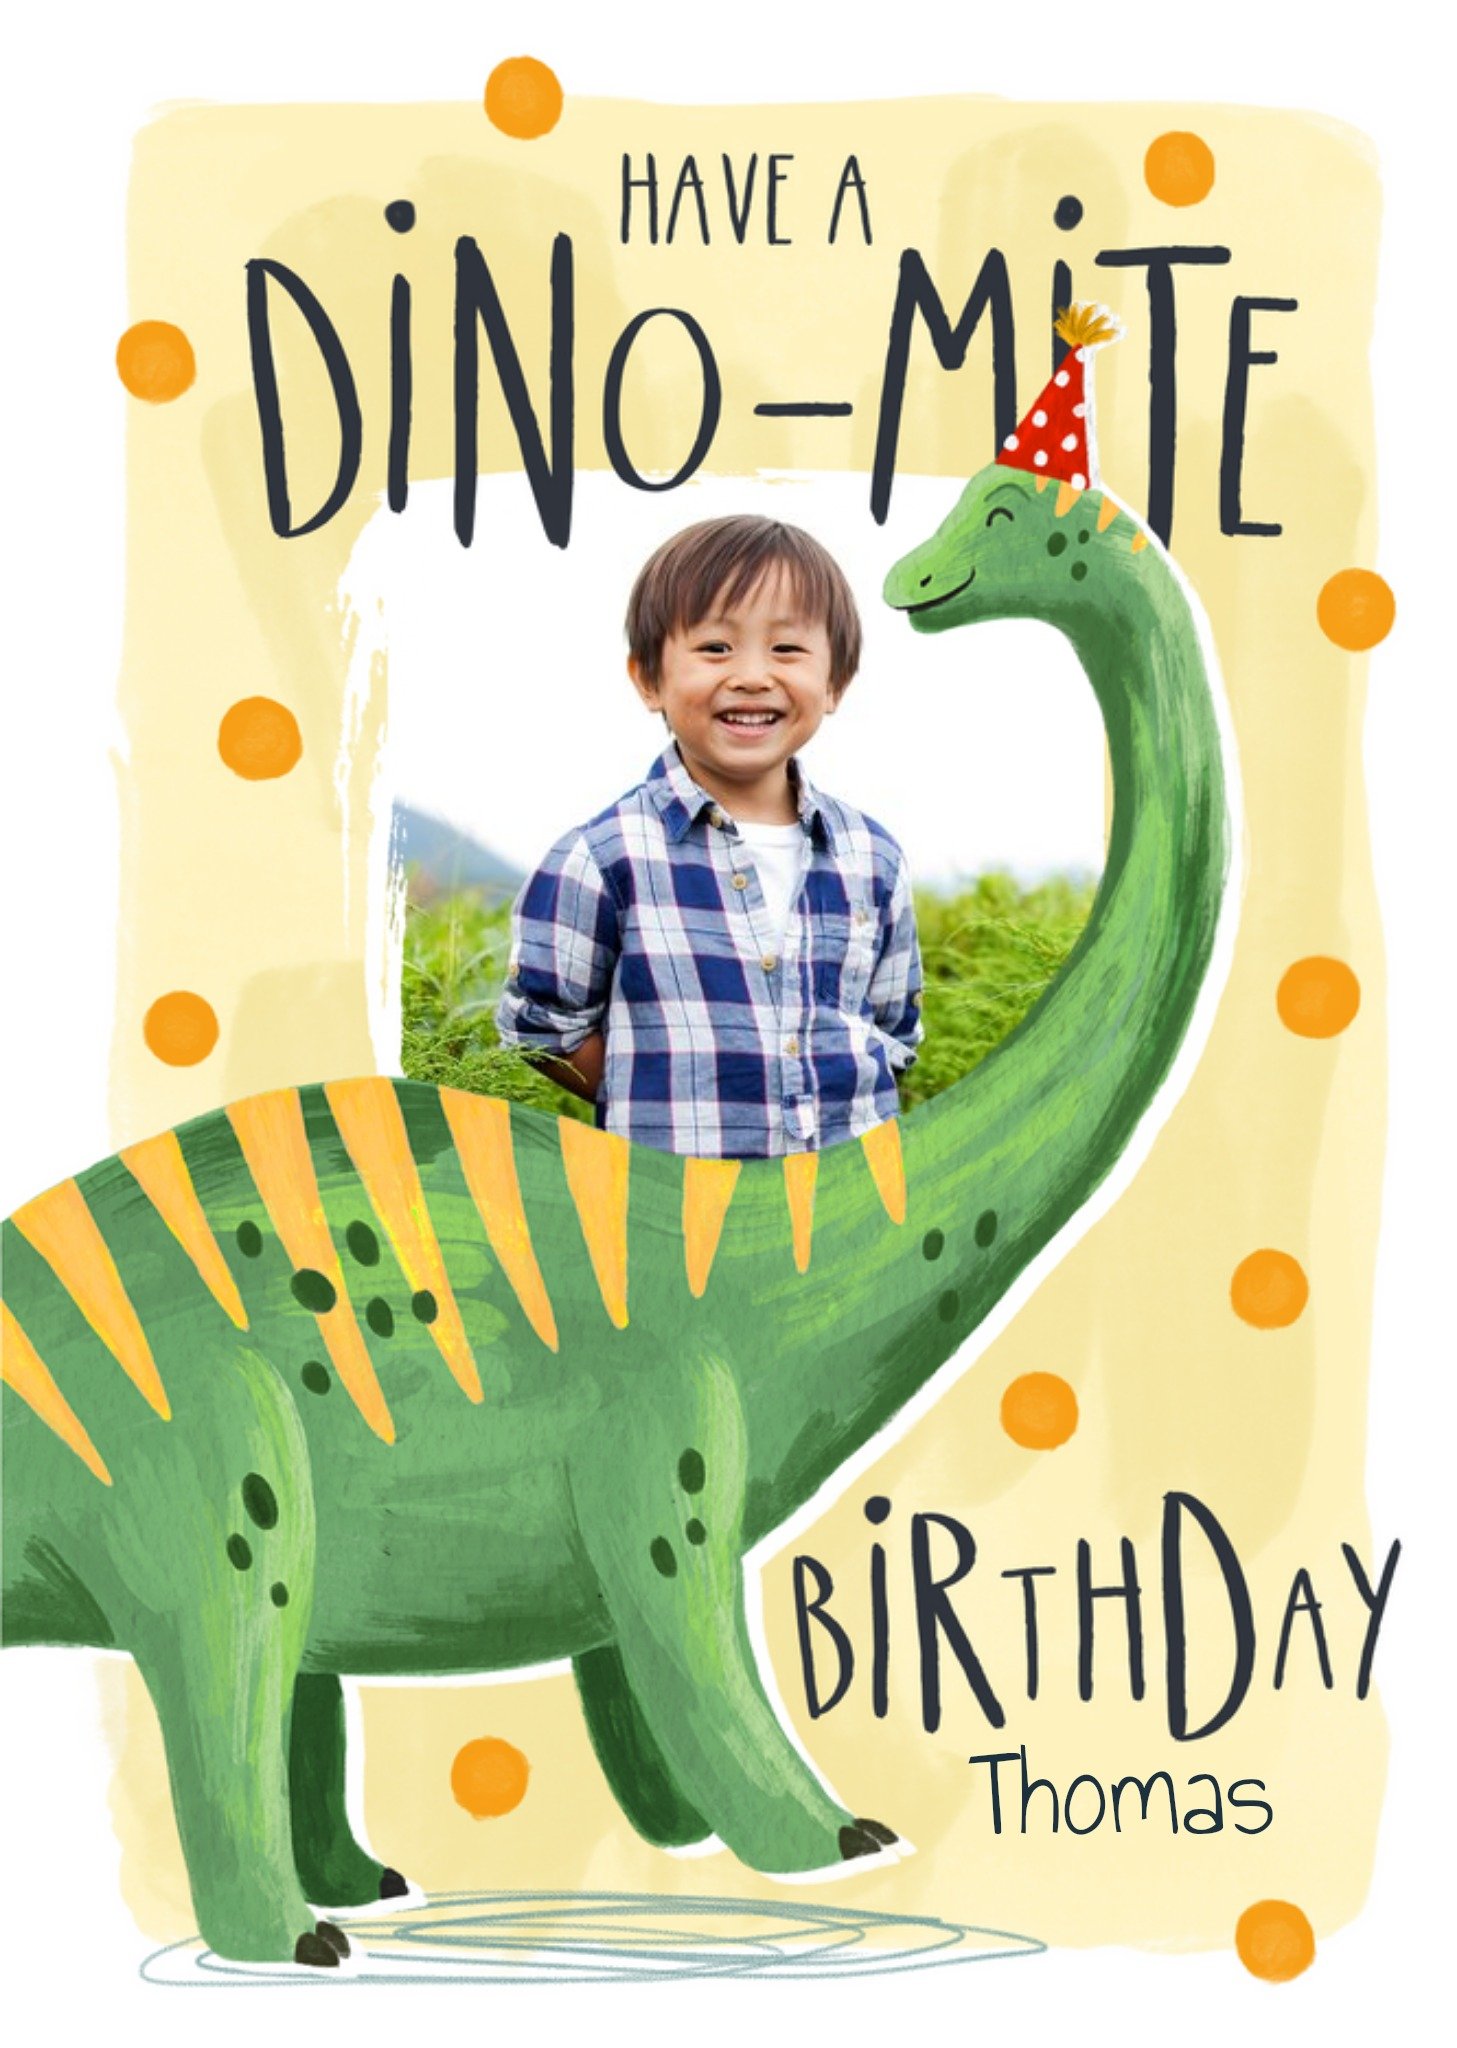 The Natural History Museum Natural History Museum Dino-Mite Birthday Photo Upload Card Ecard